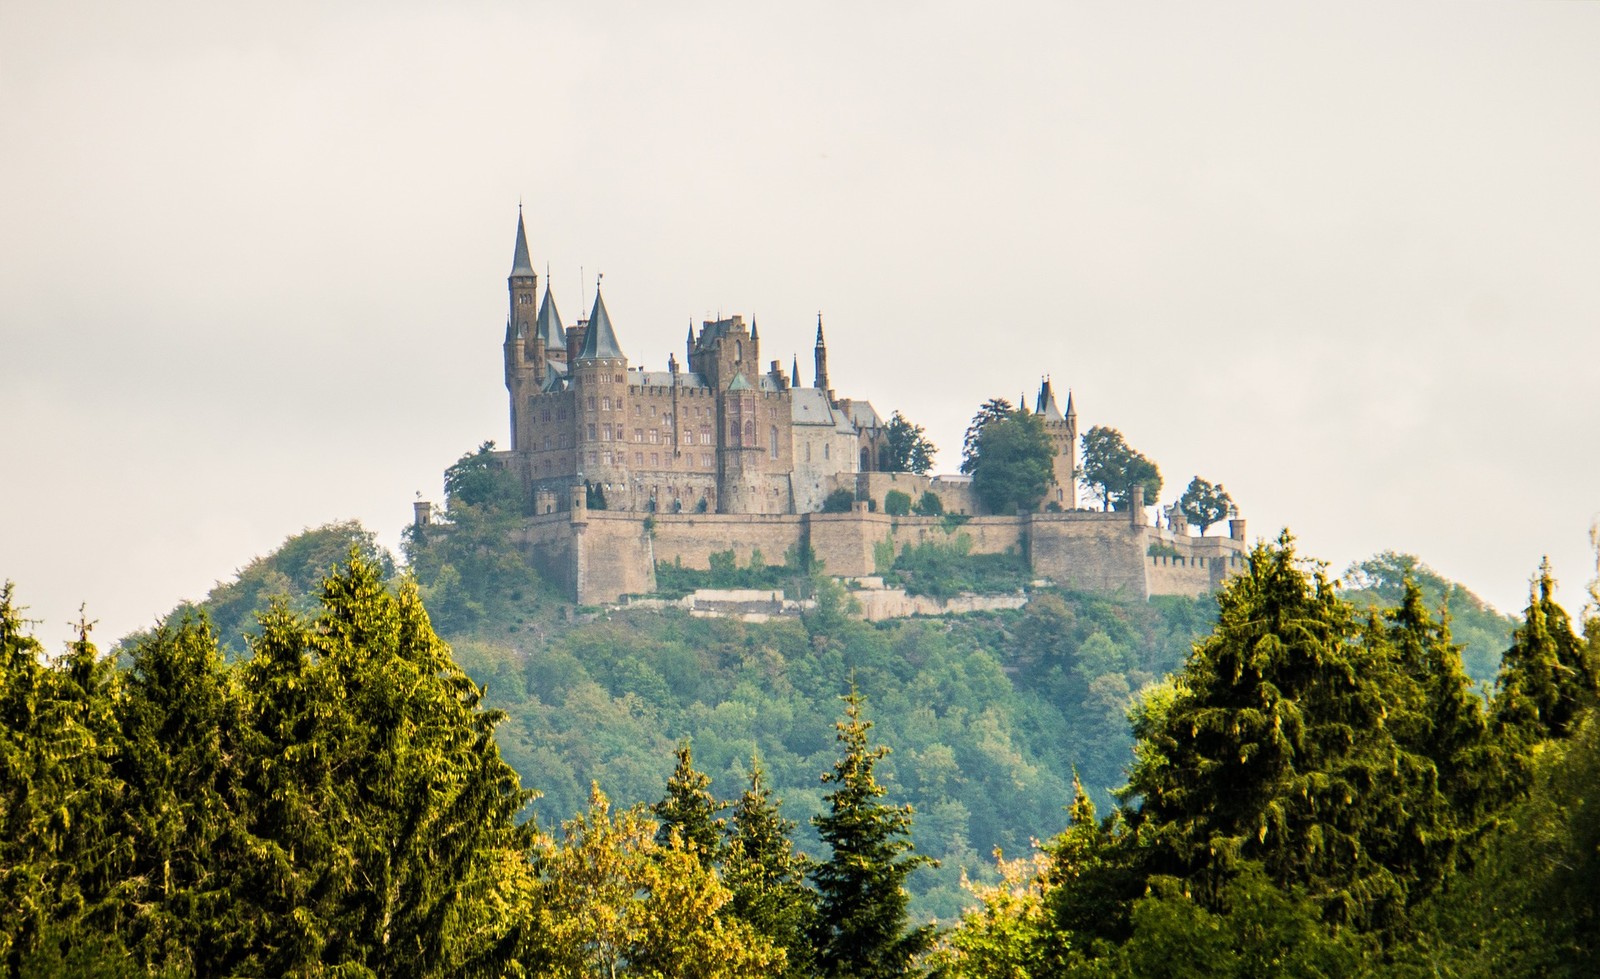 Hohenzollern Castle - a medieval stronghold of the Hohenzollern family